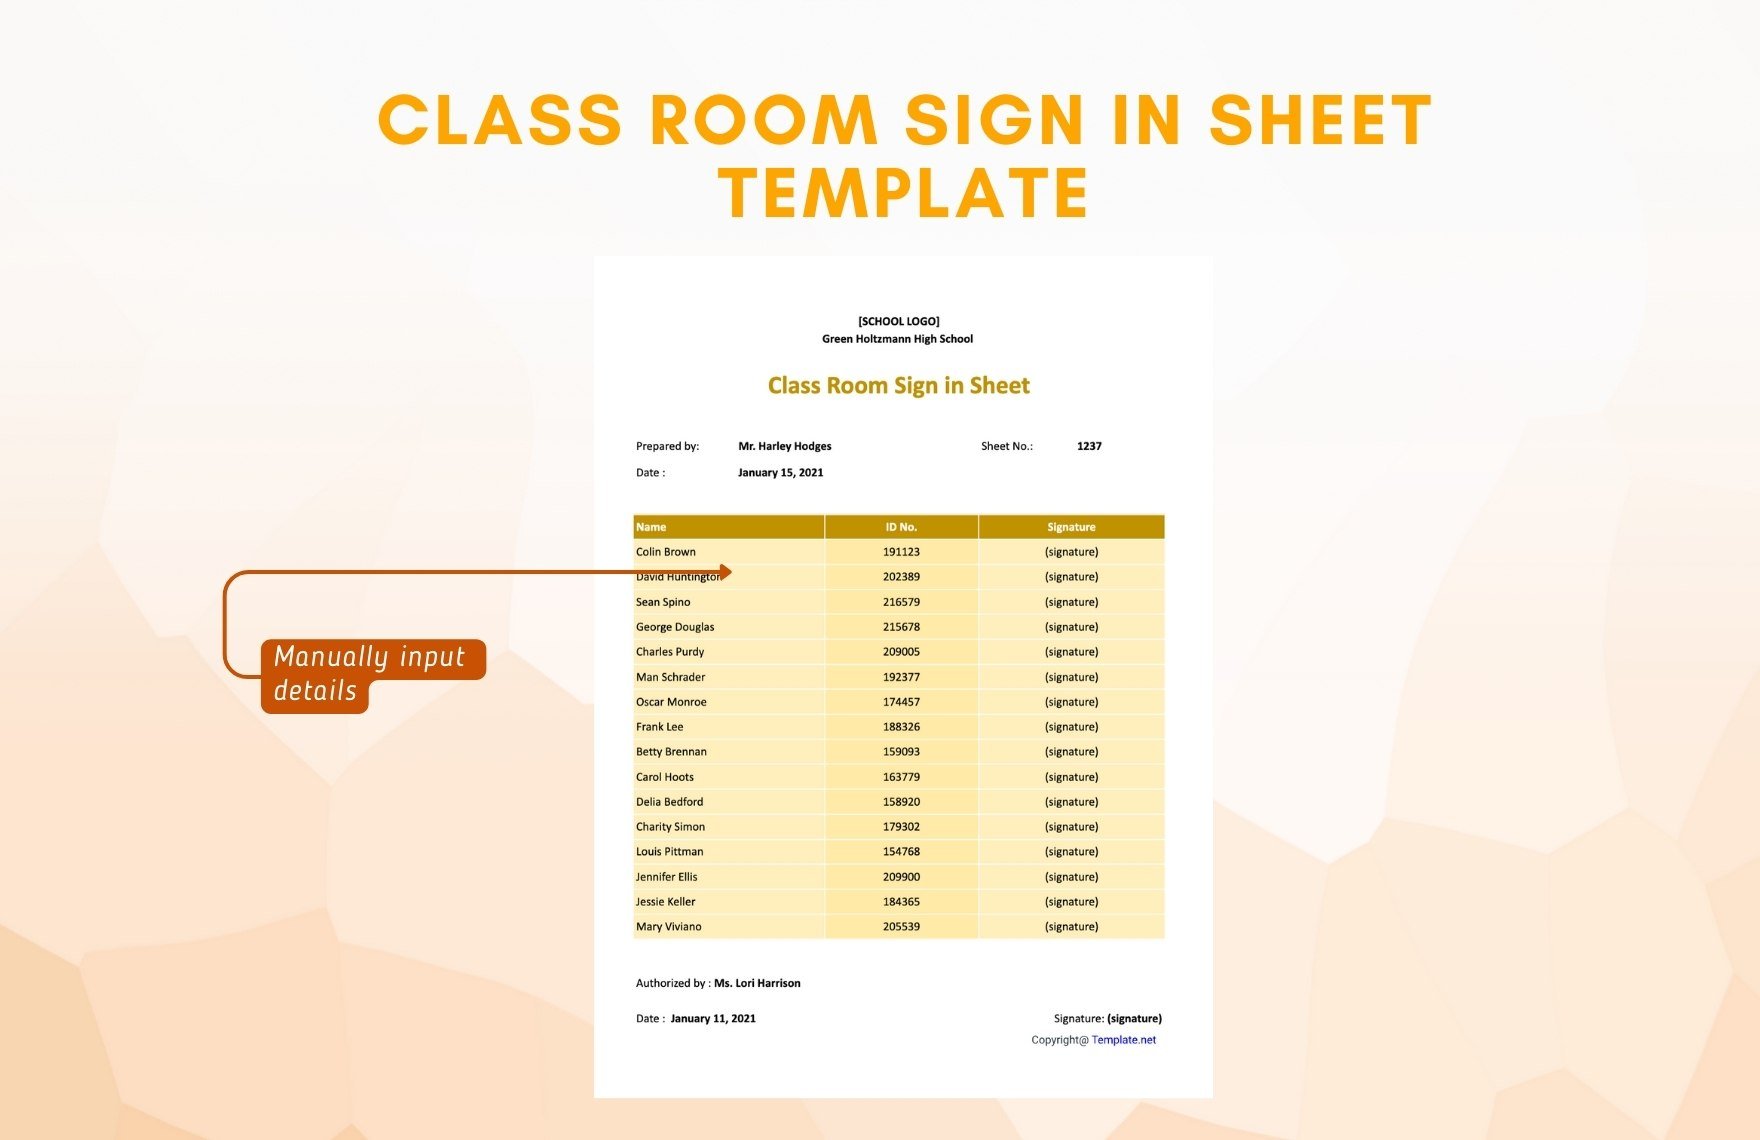 Class Room Sign in Sheet Template